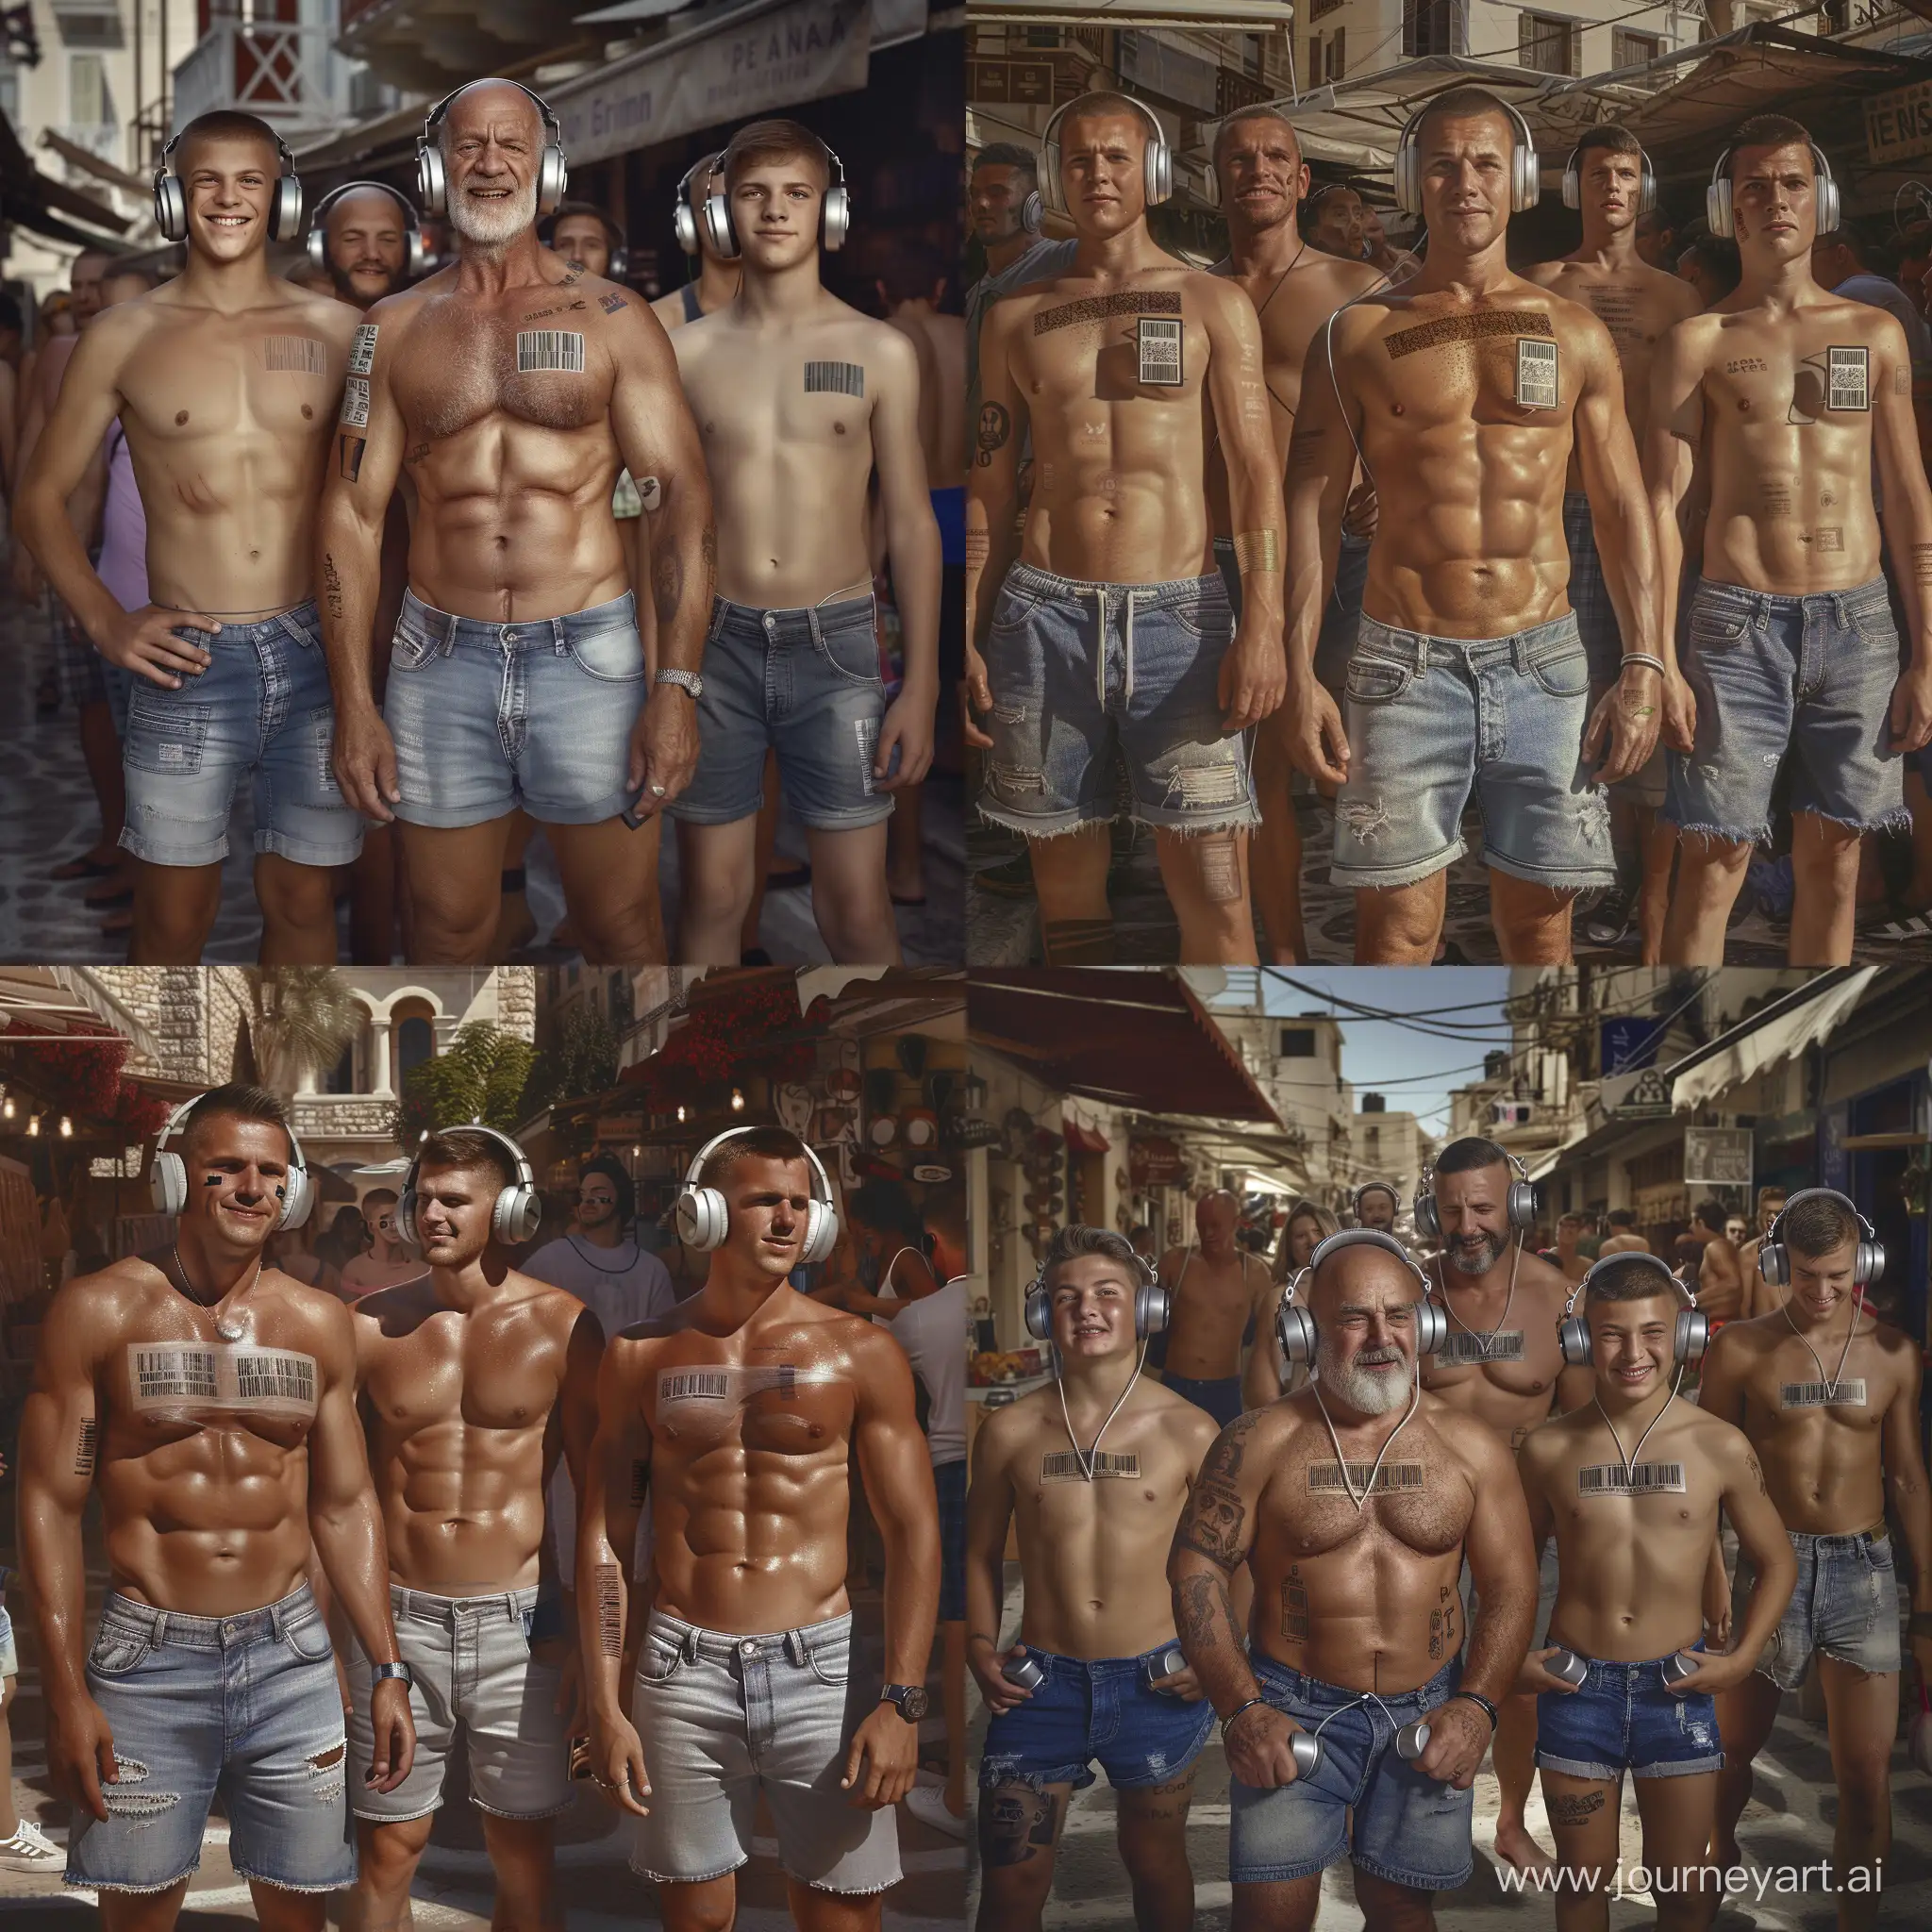 Handsome muscular middle-aged men and handsome muscular college-age boys each wear silver headphones and fitted denim cutoff shorts, dazed smiles, small barcode tattooed on each man's chest, Greek street market setting, facing the viewer, mass indoctrination, hyperrealistic, cinematic